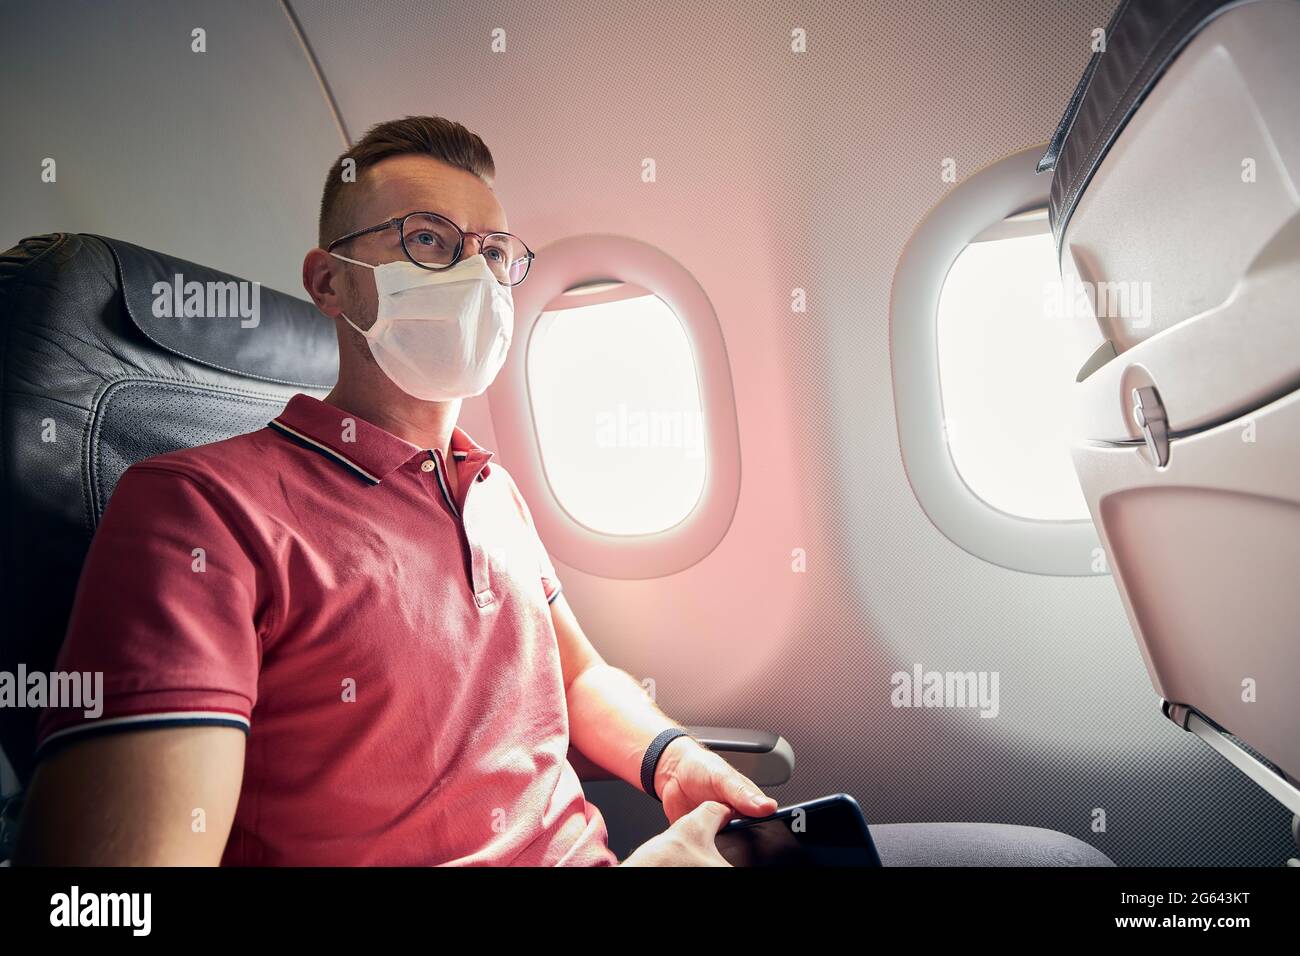 Portrait of passenger with protective face mask in airplane. Themes traveling in new normal and personal protection during pandemic covid-19. Stock Photo